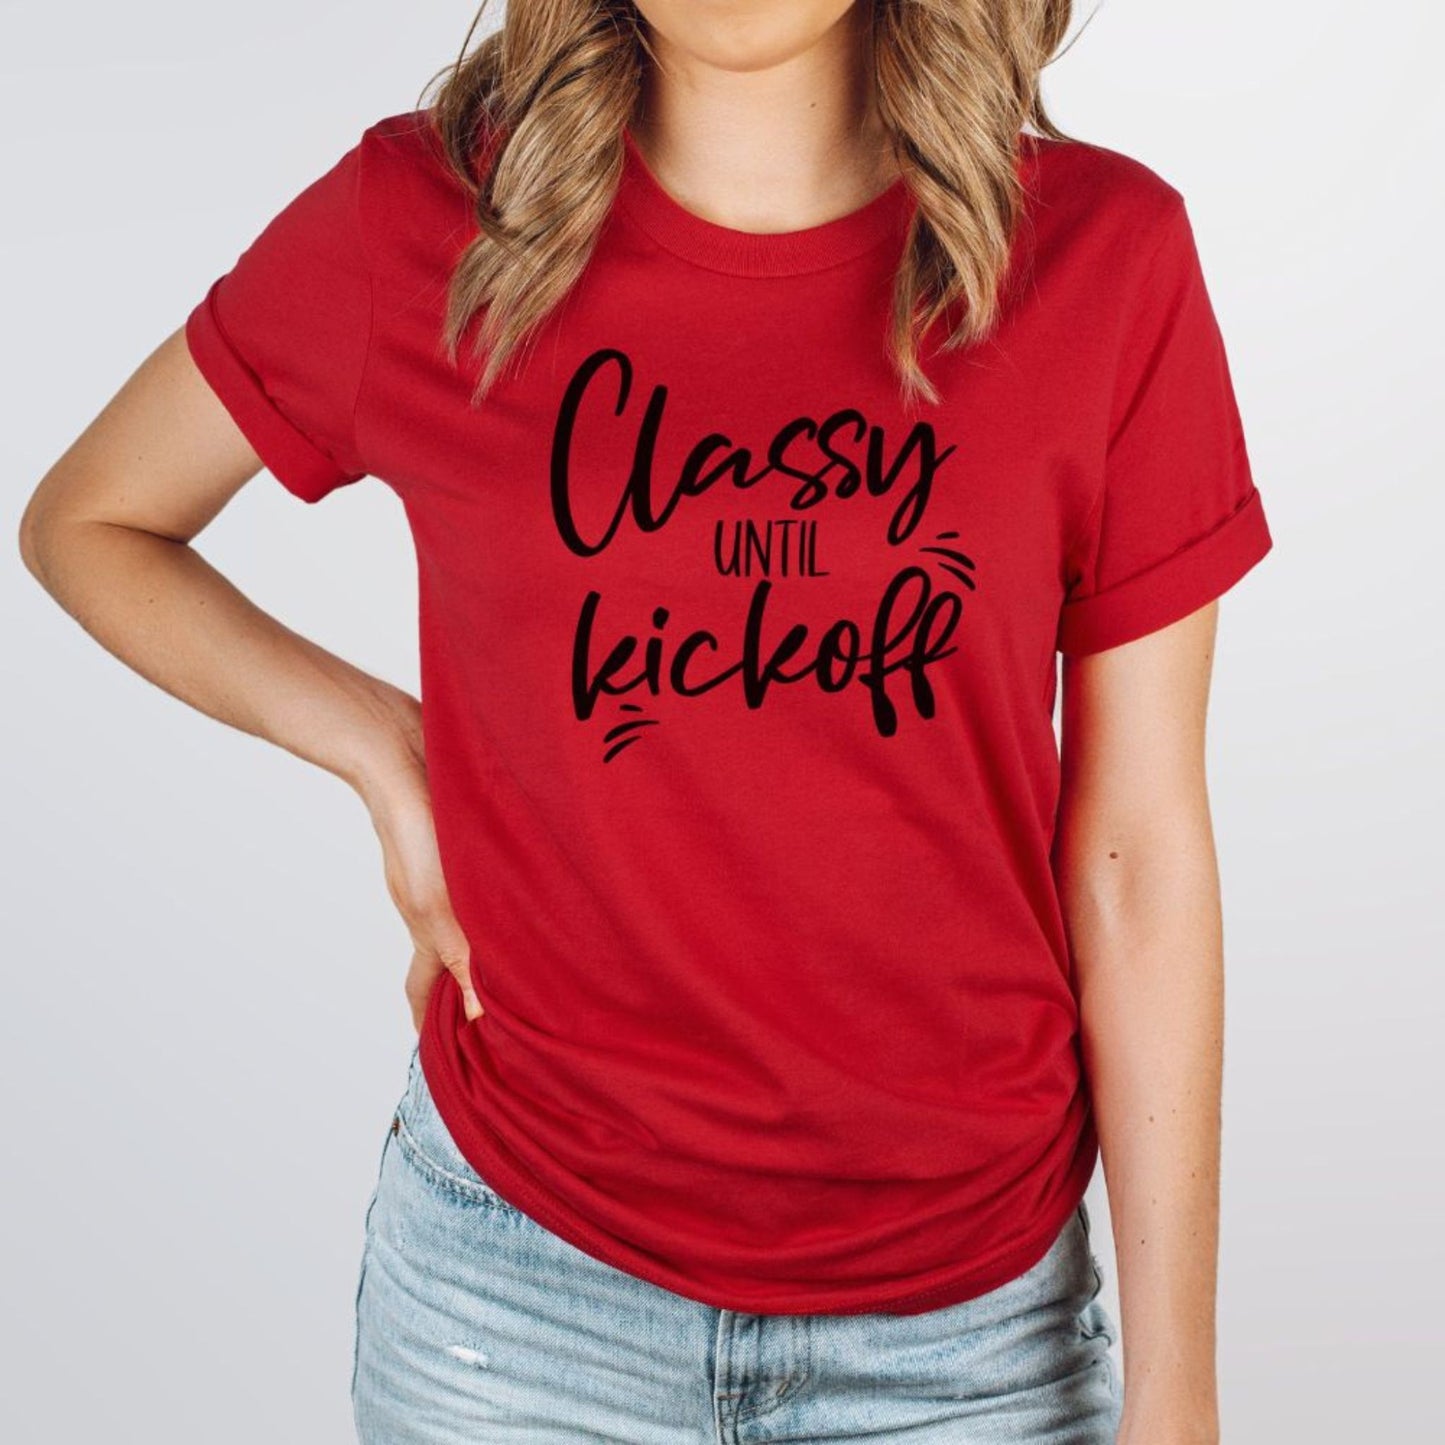 Classy Until Kickoff Graphic Tee